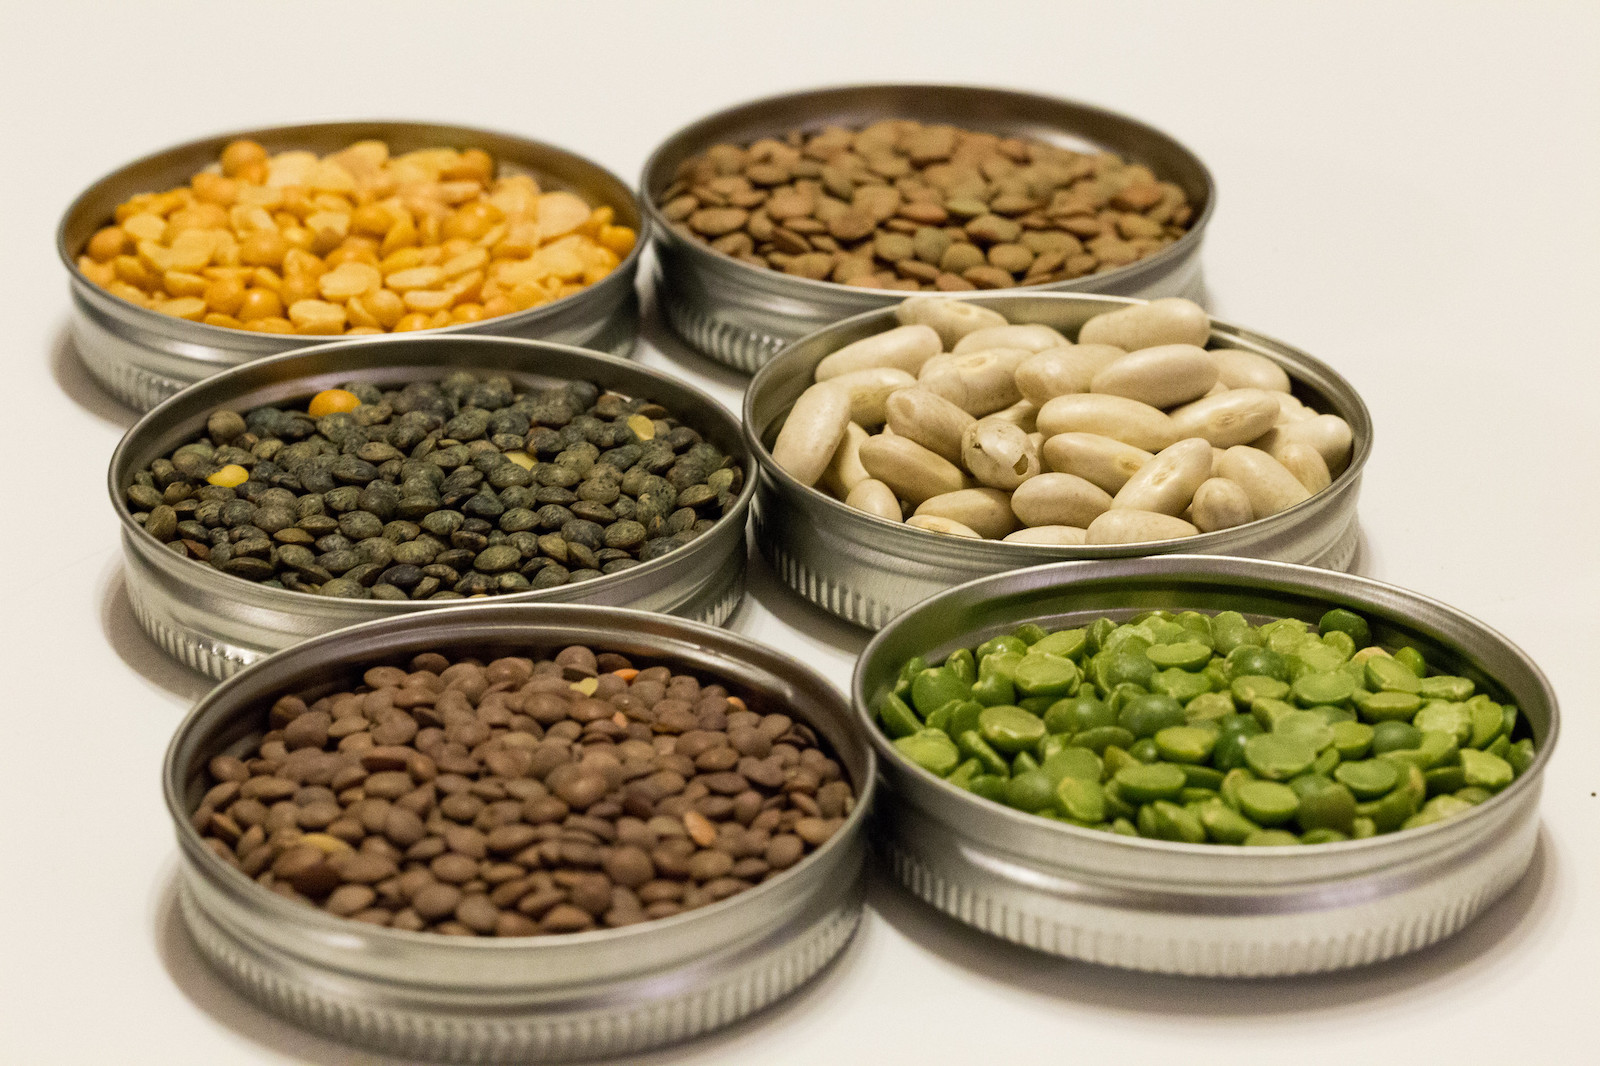 Foods of the Future: Legumes, Pulses, and Beans